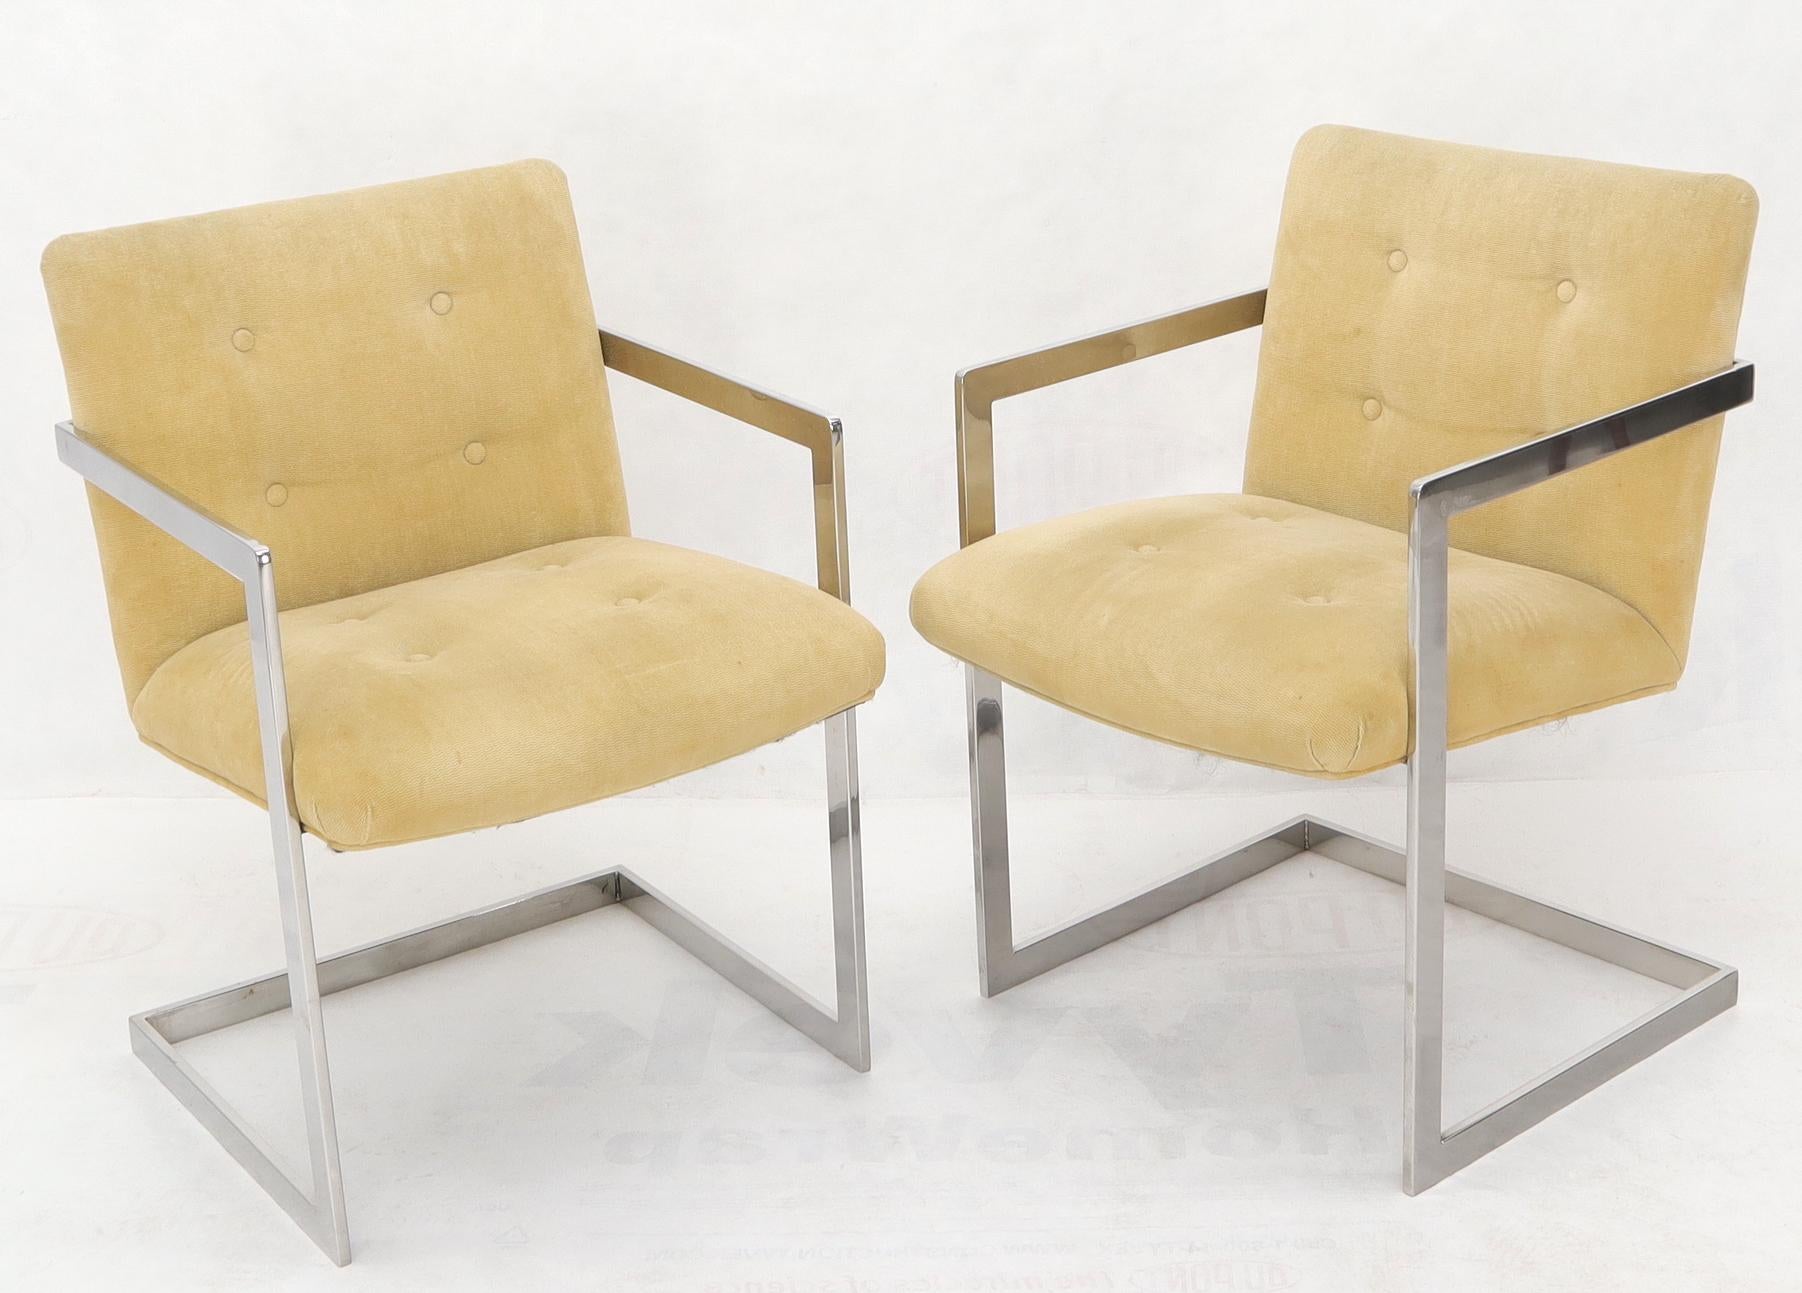 Milo Baughman attributed dining or conference room set consisting of 8 chrome upholstered chairs and sqaure 60x60 dining table. The chairs upholstered in suede light gold to camel yellow fabric.